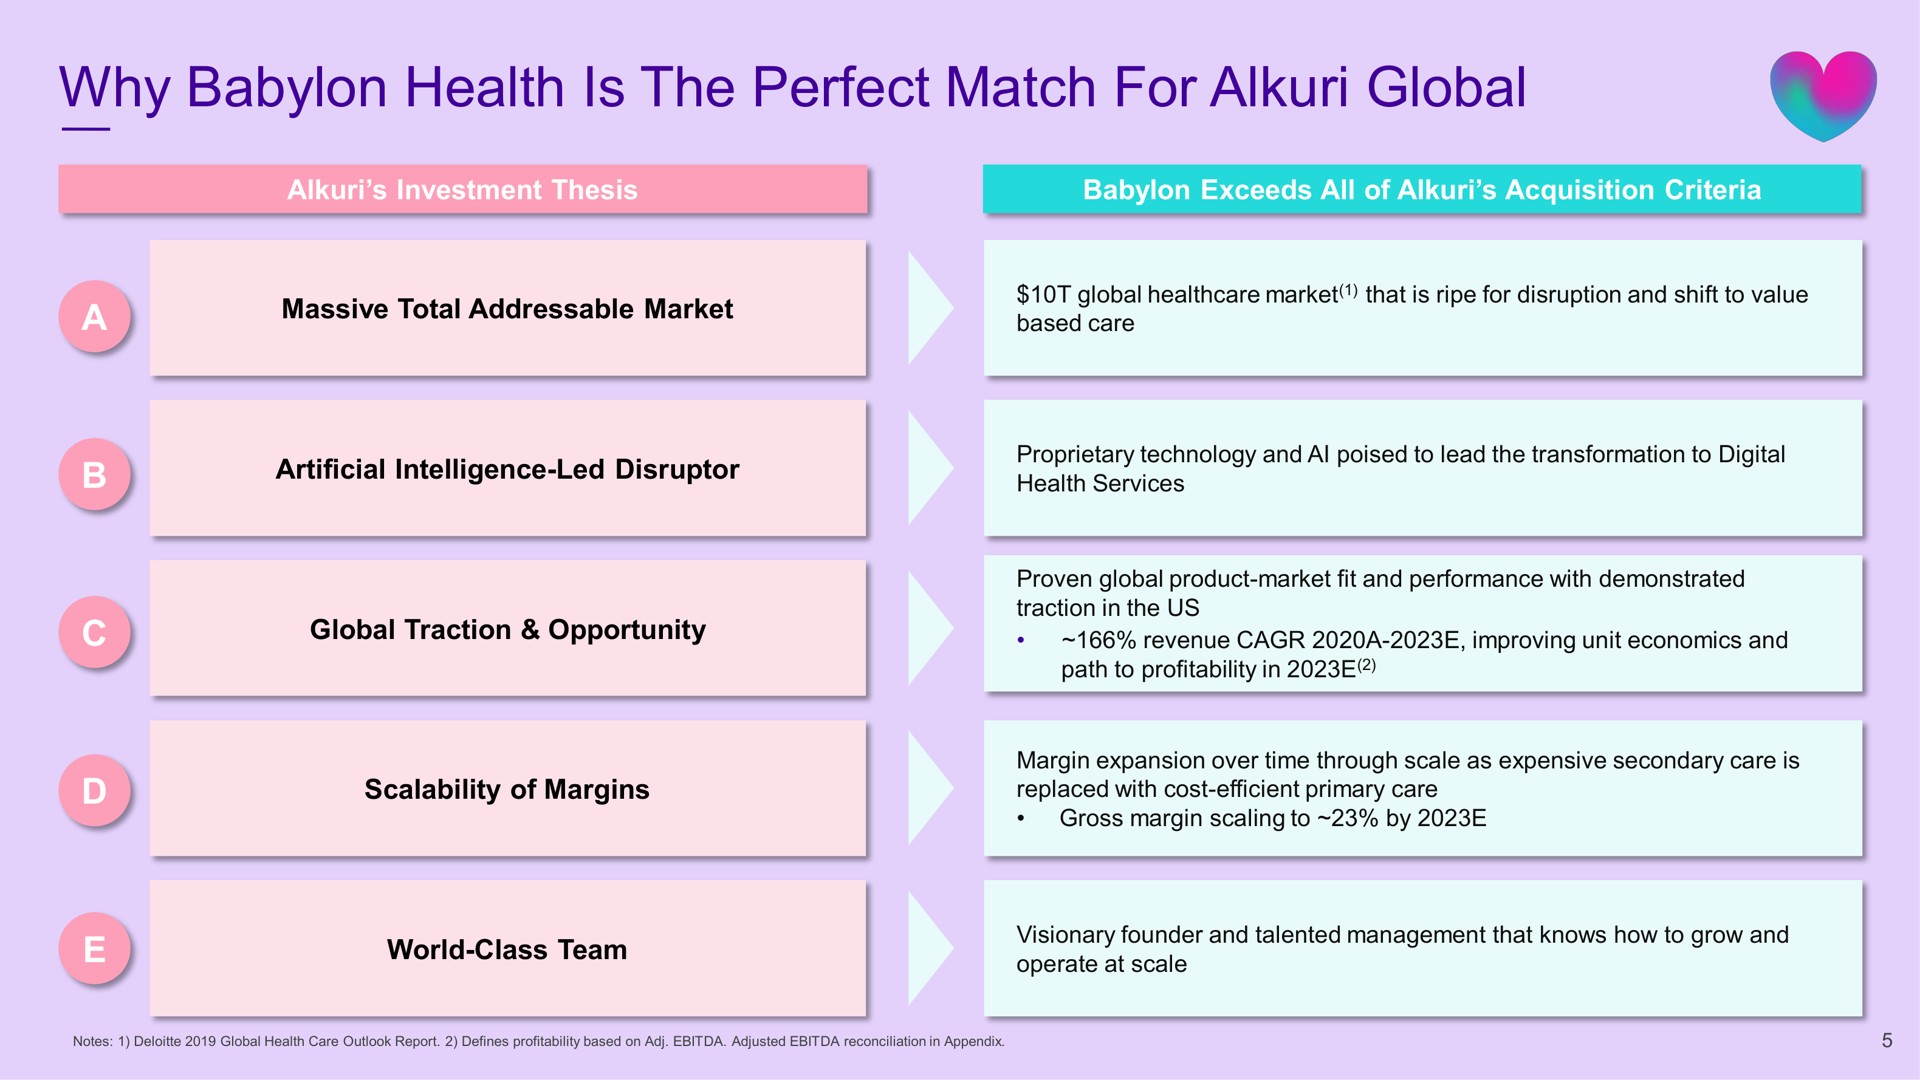 why health is the perfect match for global | Babylon